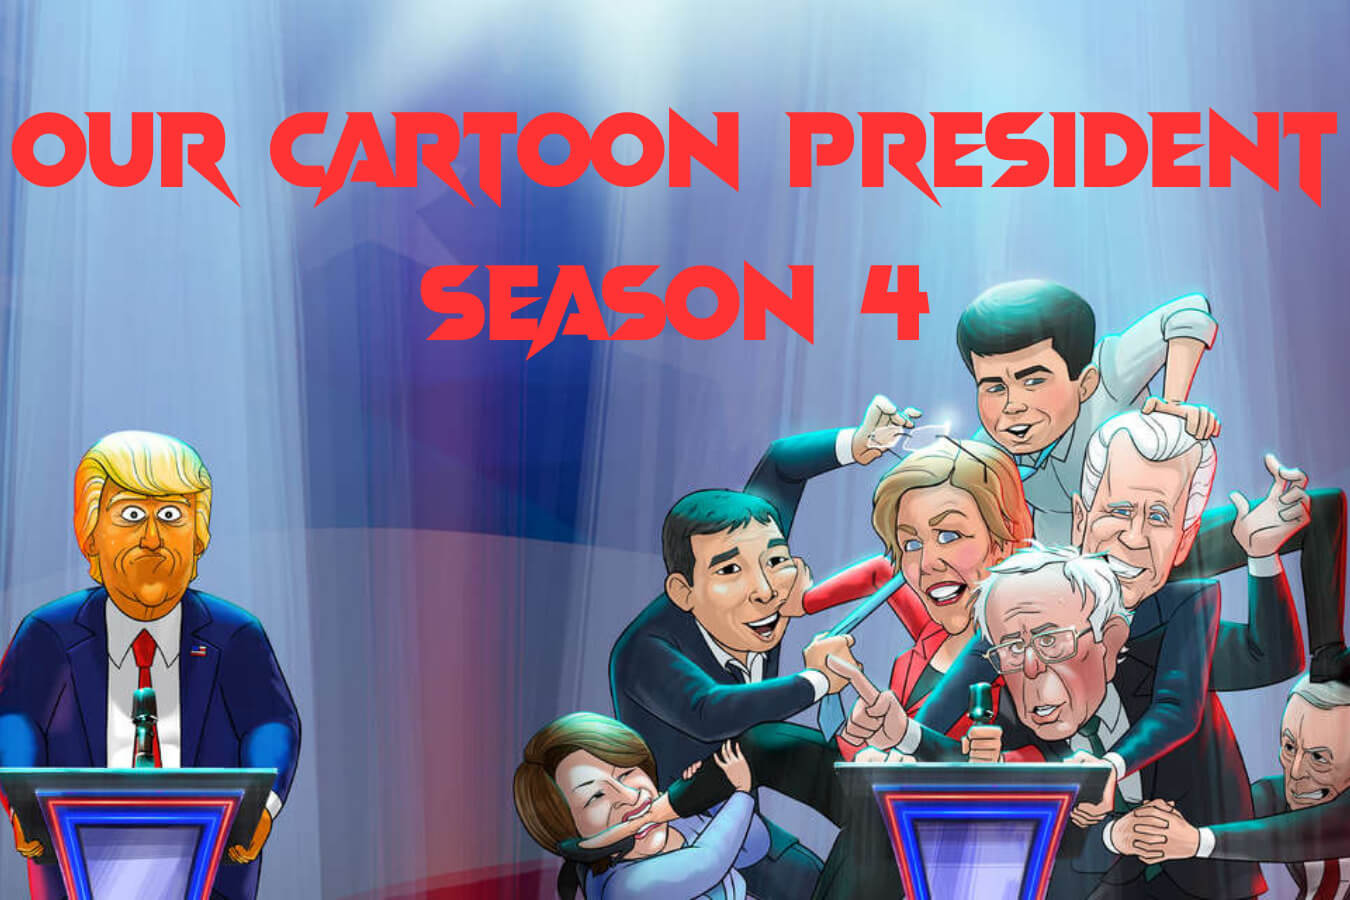 Will there be any Updates on the Our Cartoon President Season 4 Trailer?